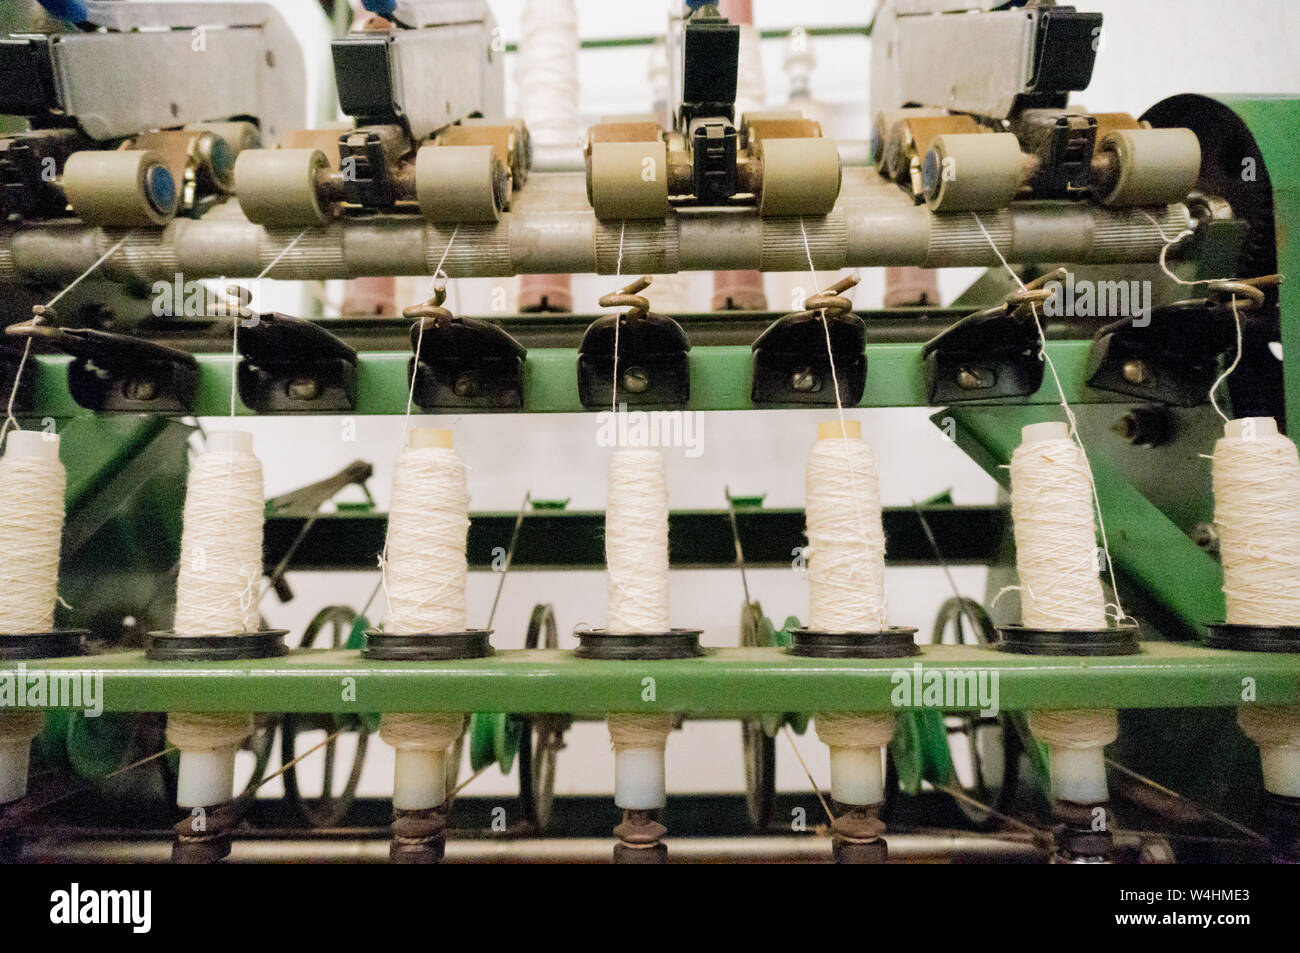 Green Spindle Weaving Machine Used To Make Cloth Stock Photo - Image of  garment, culture: 154004772